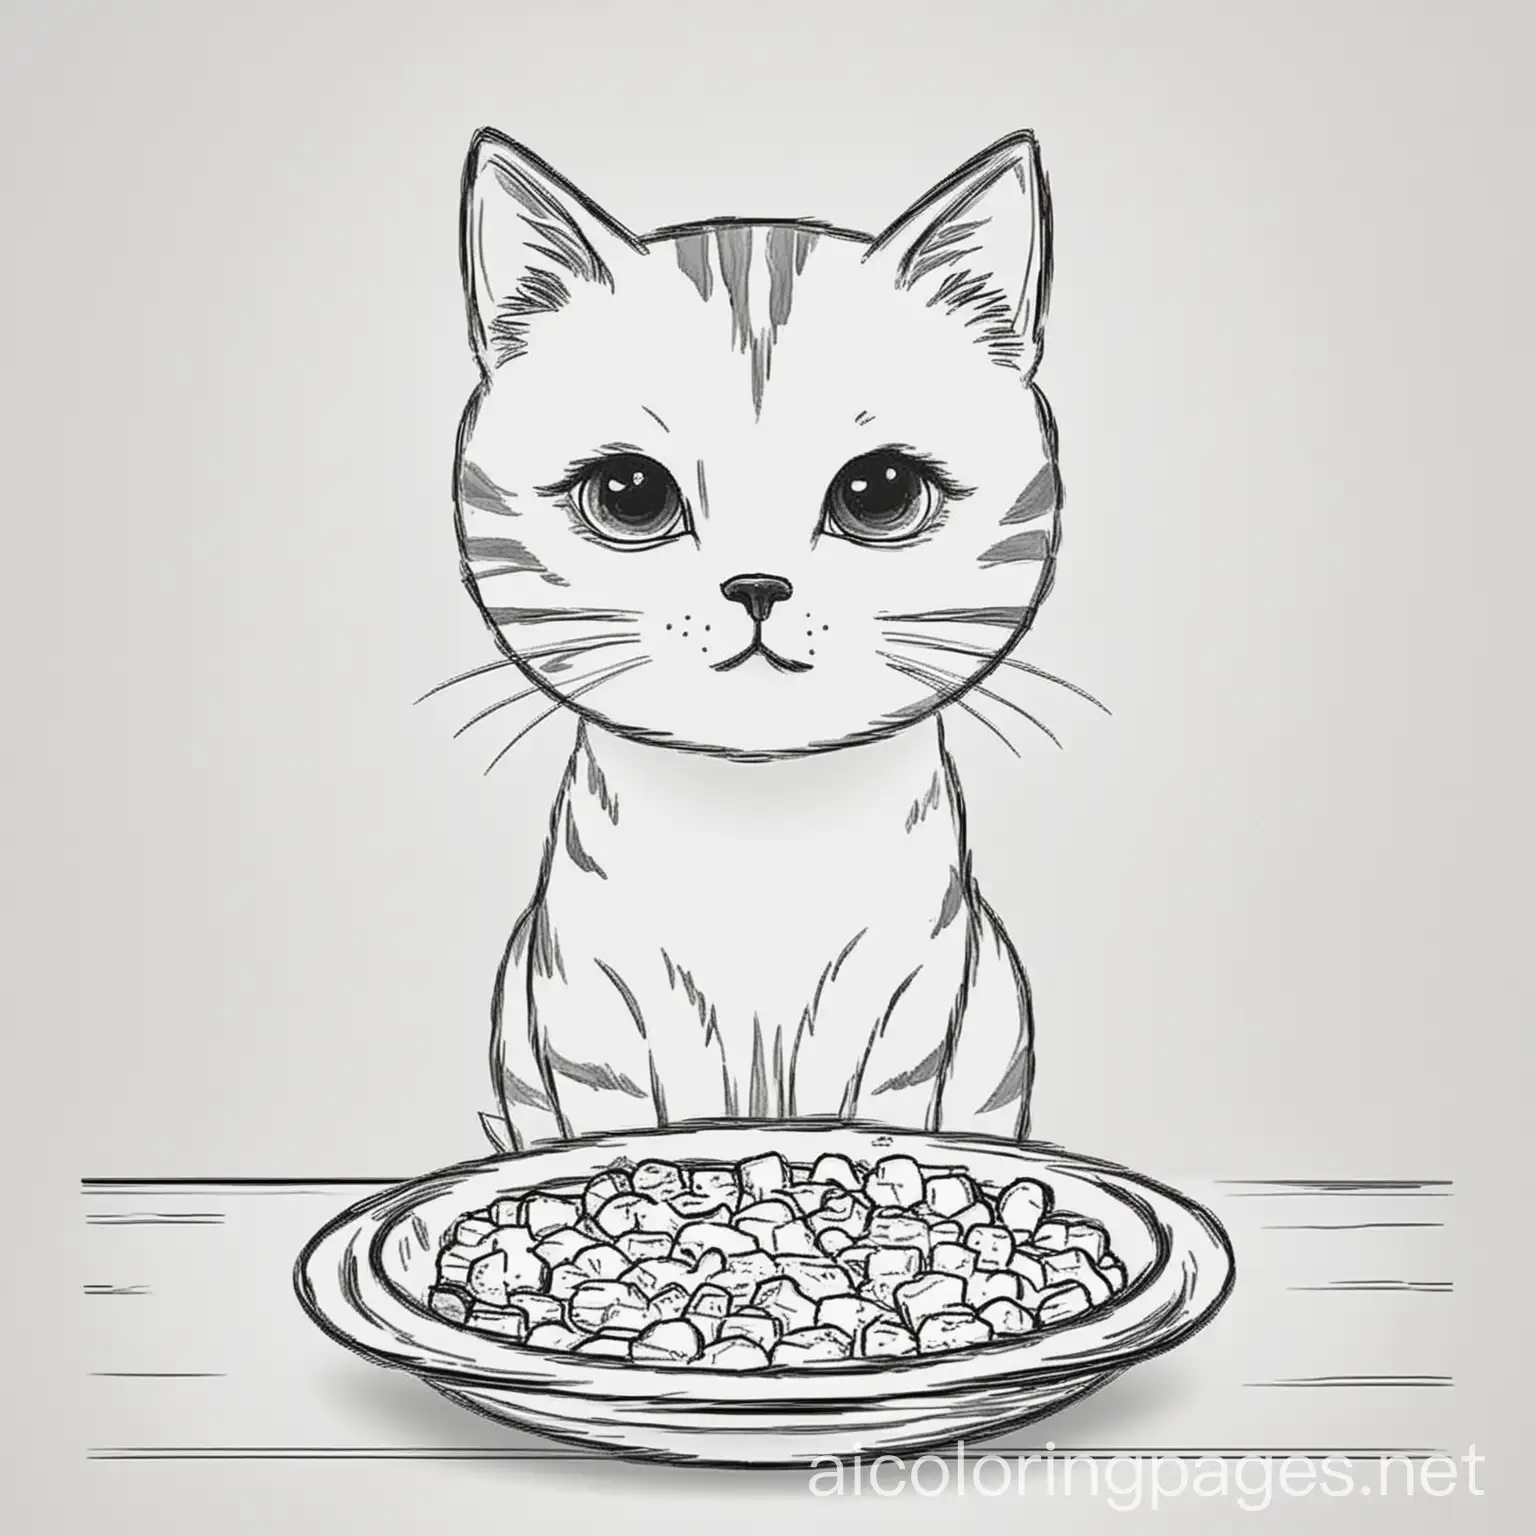 a cat thinking about food, Coloring Page, black and white, line art, white background, Simplicity, Ample White Space. The background of the coloring page is plain white to make it easy for young children to color within the lines. The outlines of all the subjects are easy to distinguish, making it simple for kids to color without too much difficulty